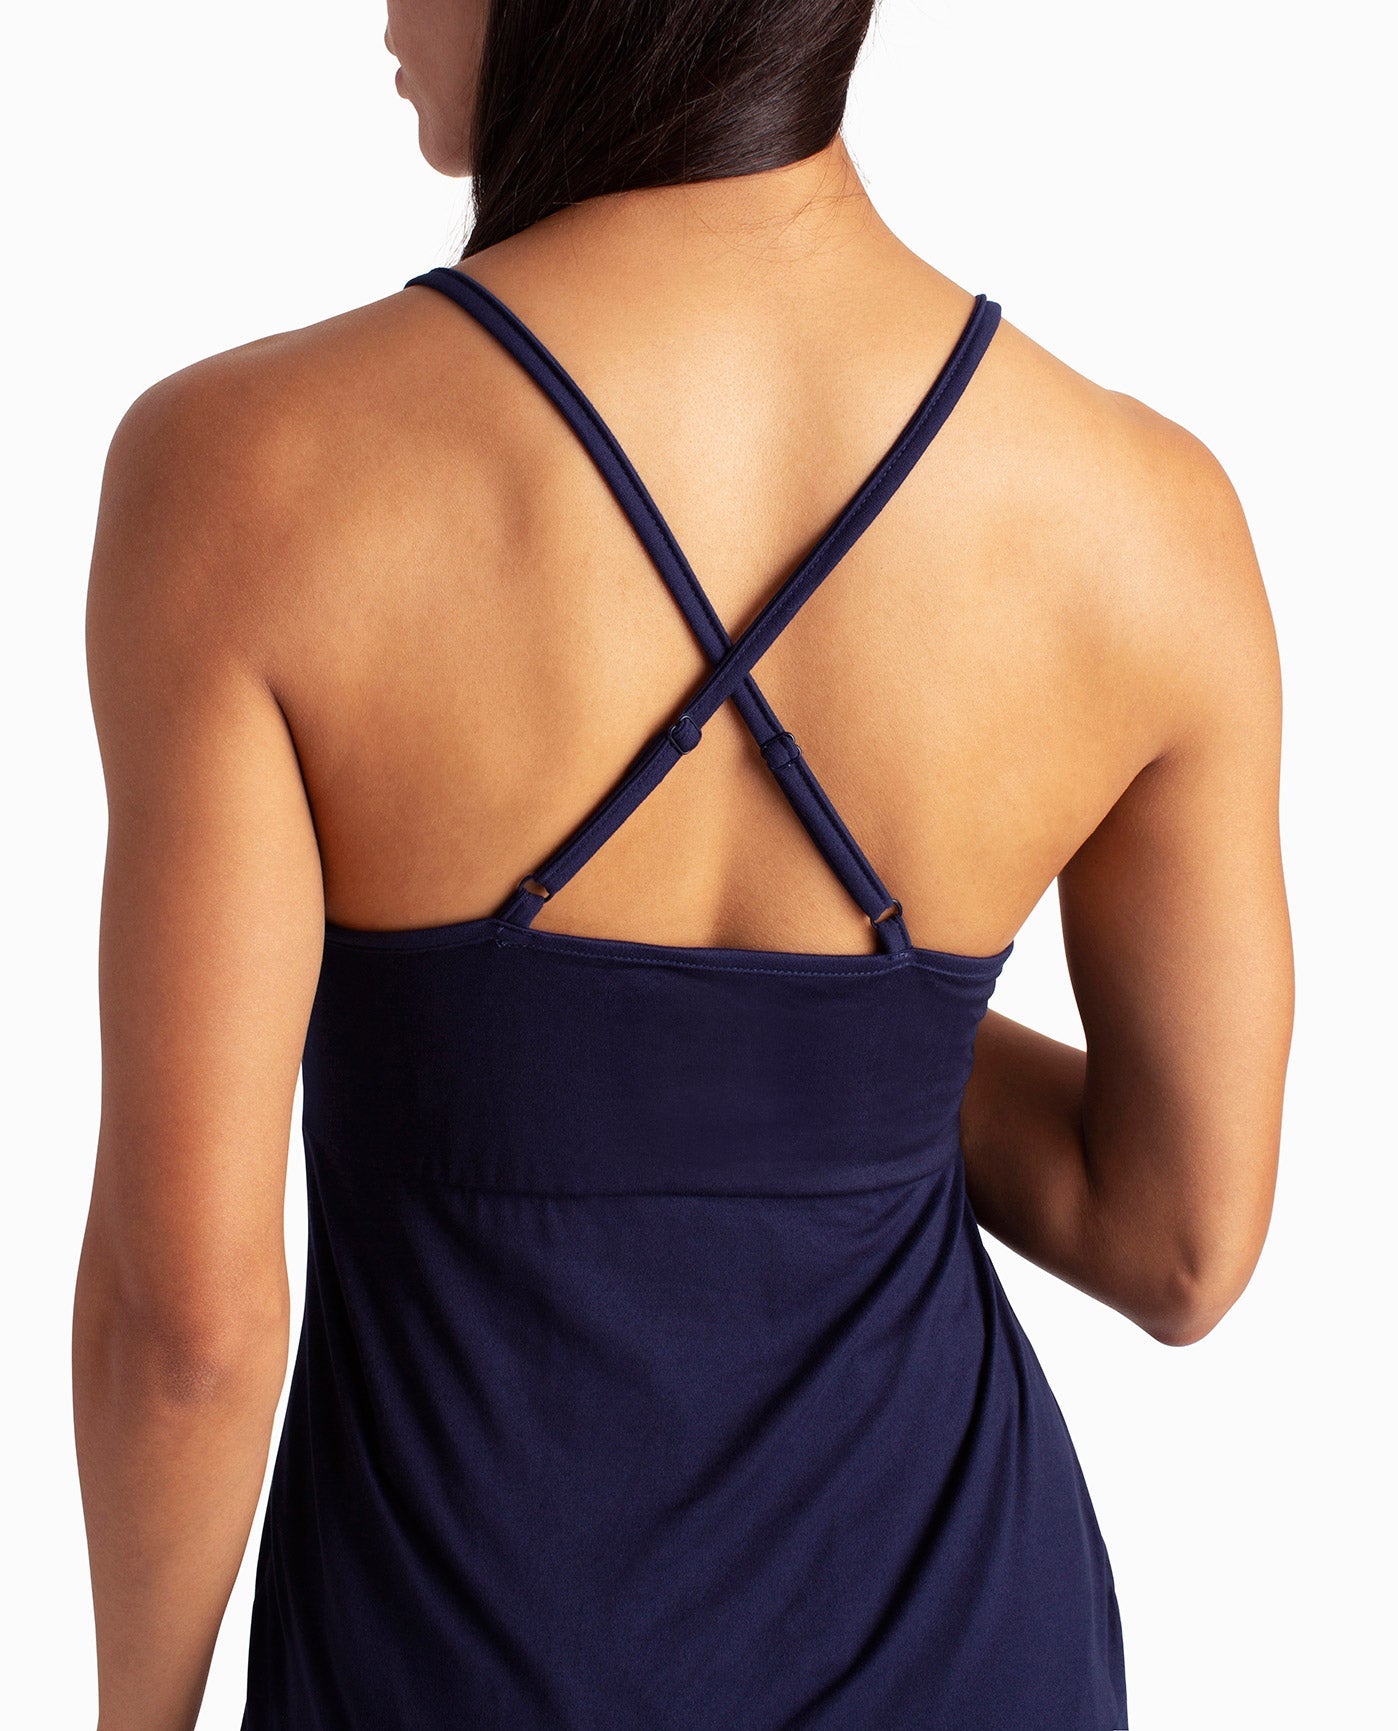 CROSS BACK PAJAMA TOP WITH ADJUSTABLE STRAPS | Peacoat